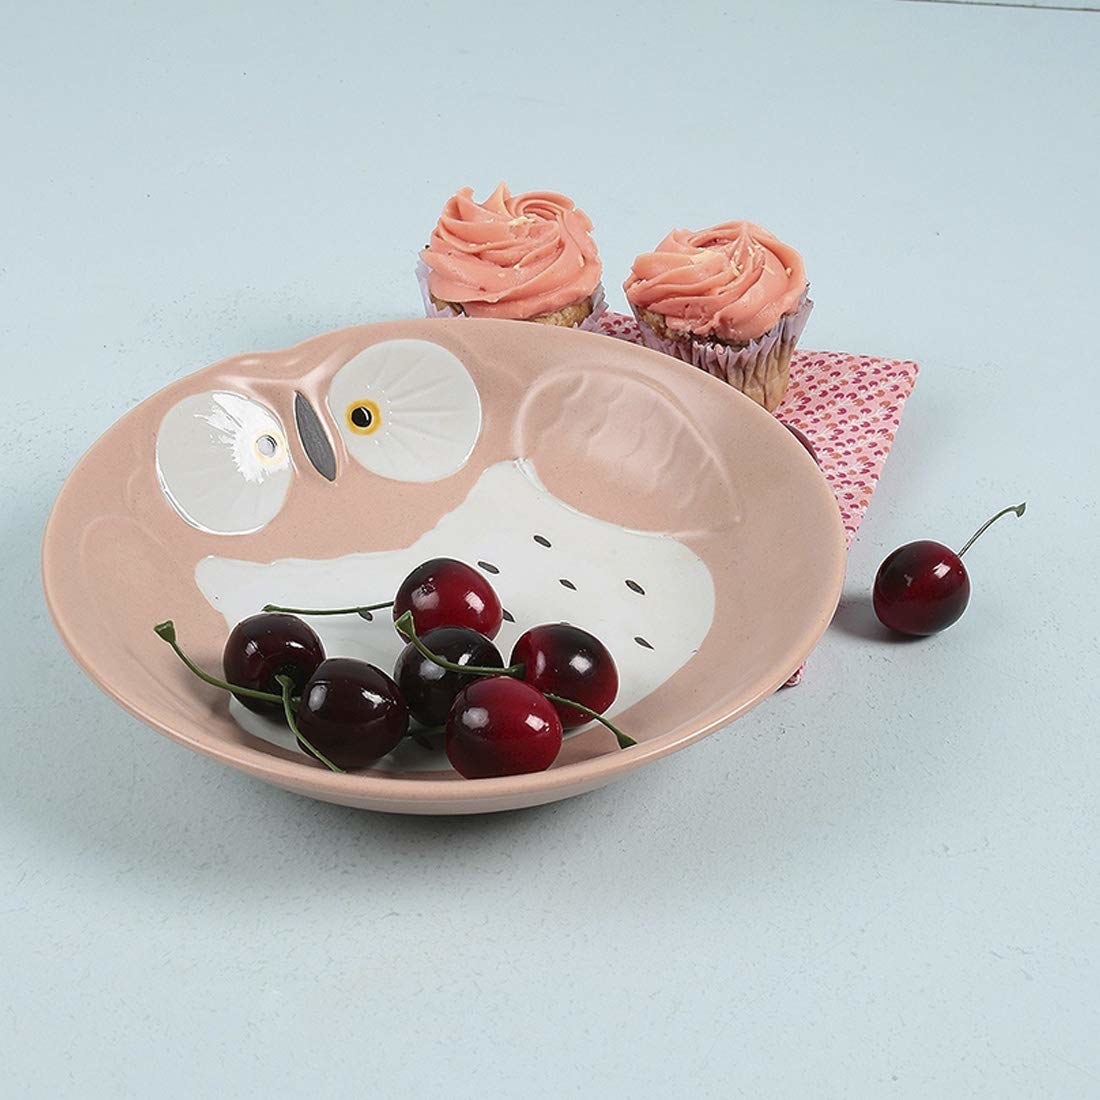 A ceramic owl plate with cherries in it 